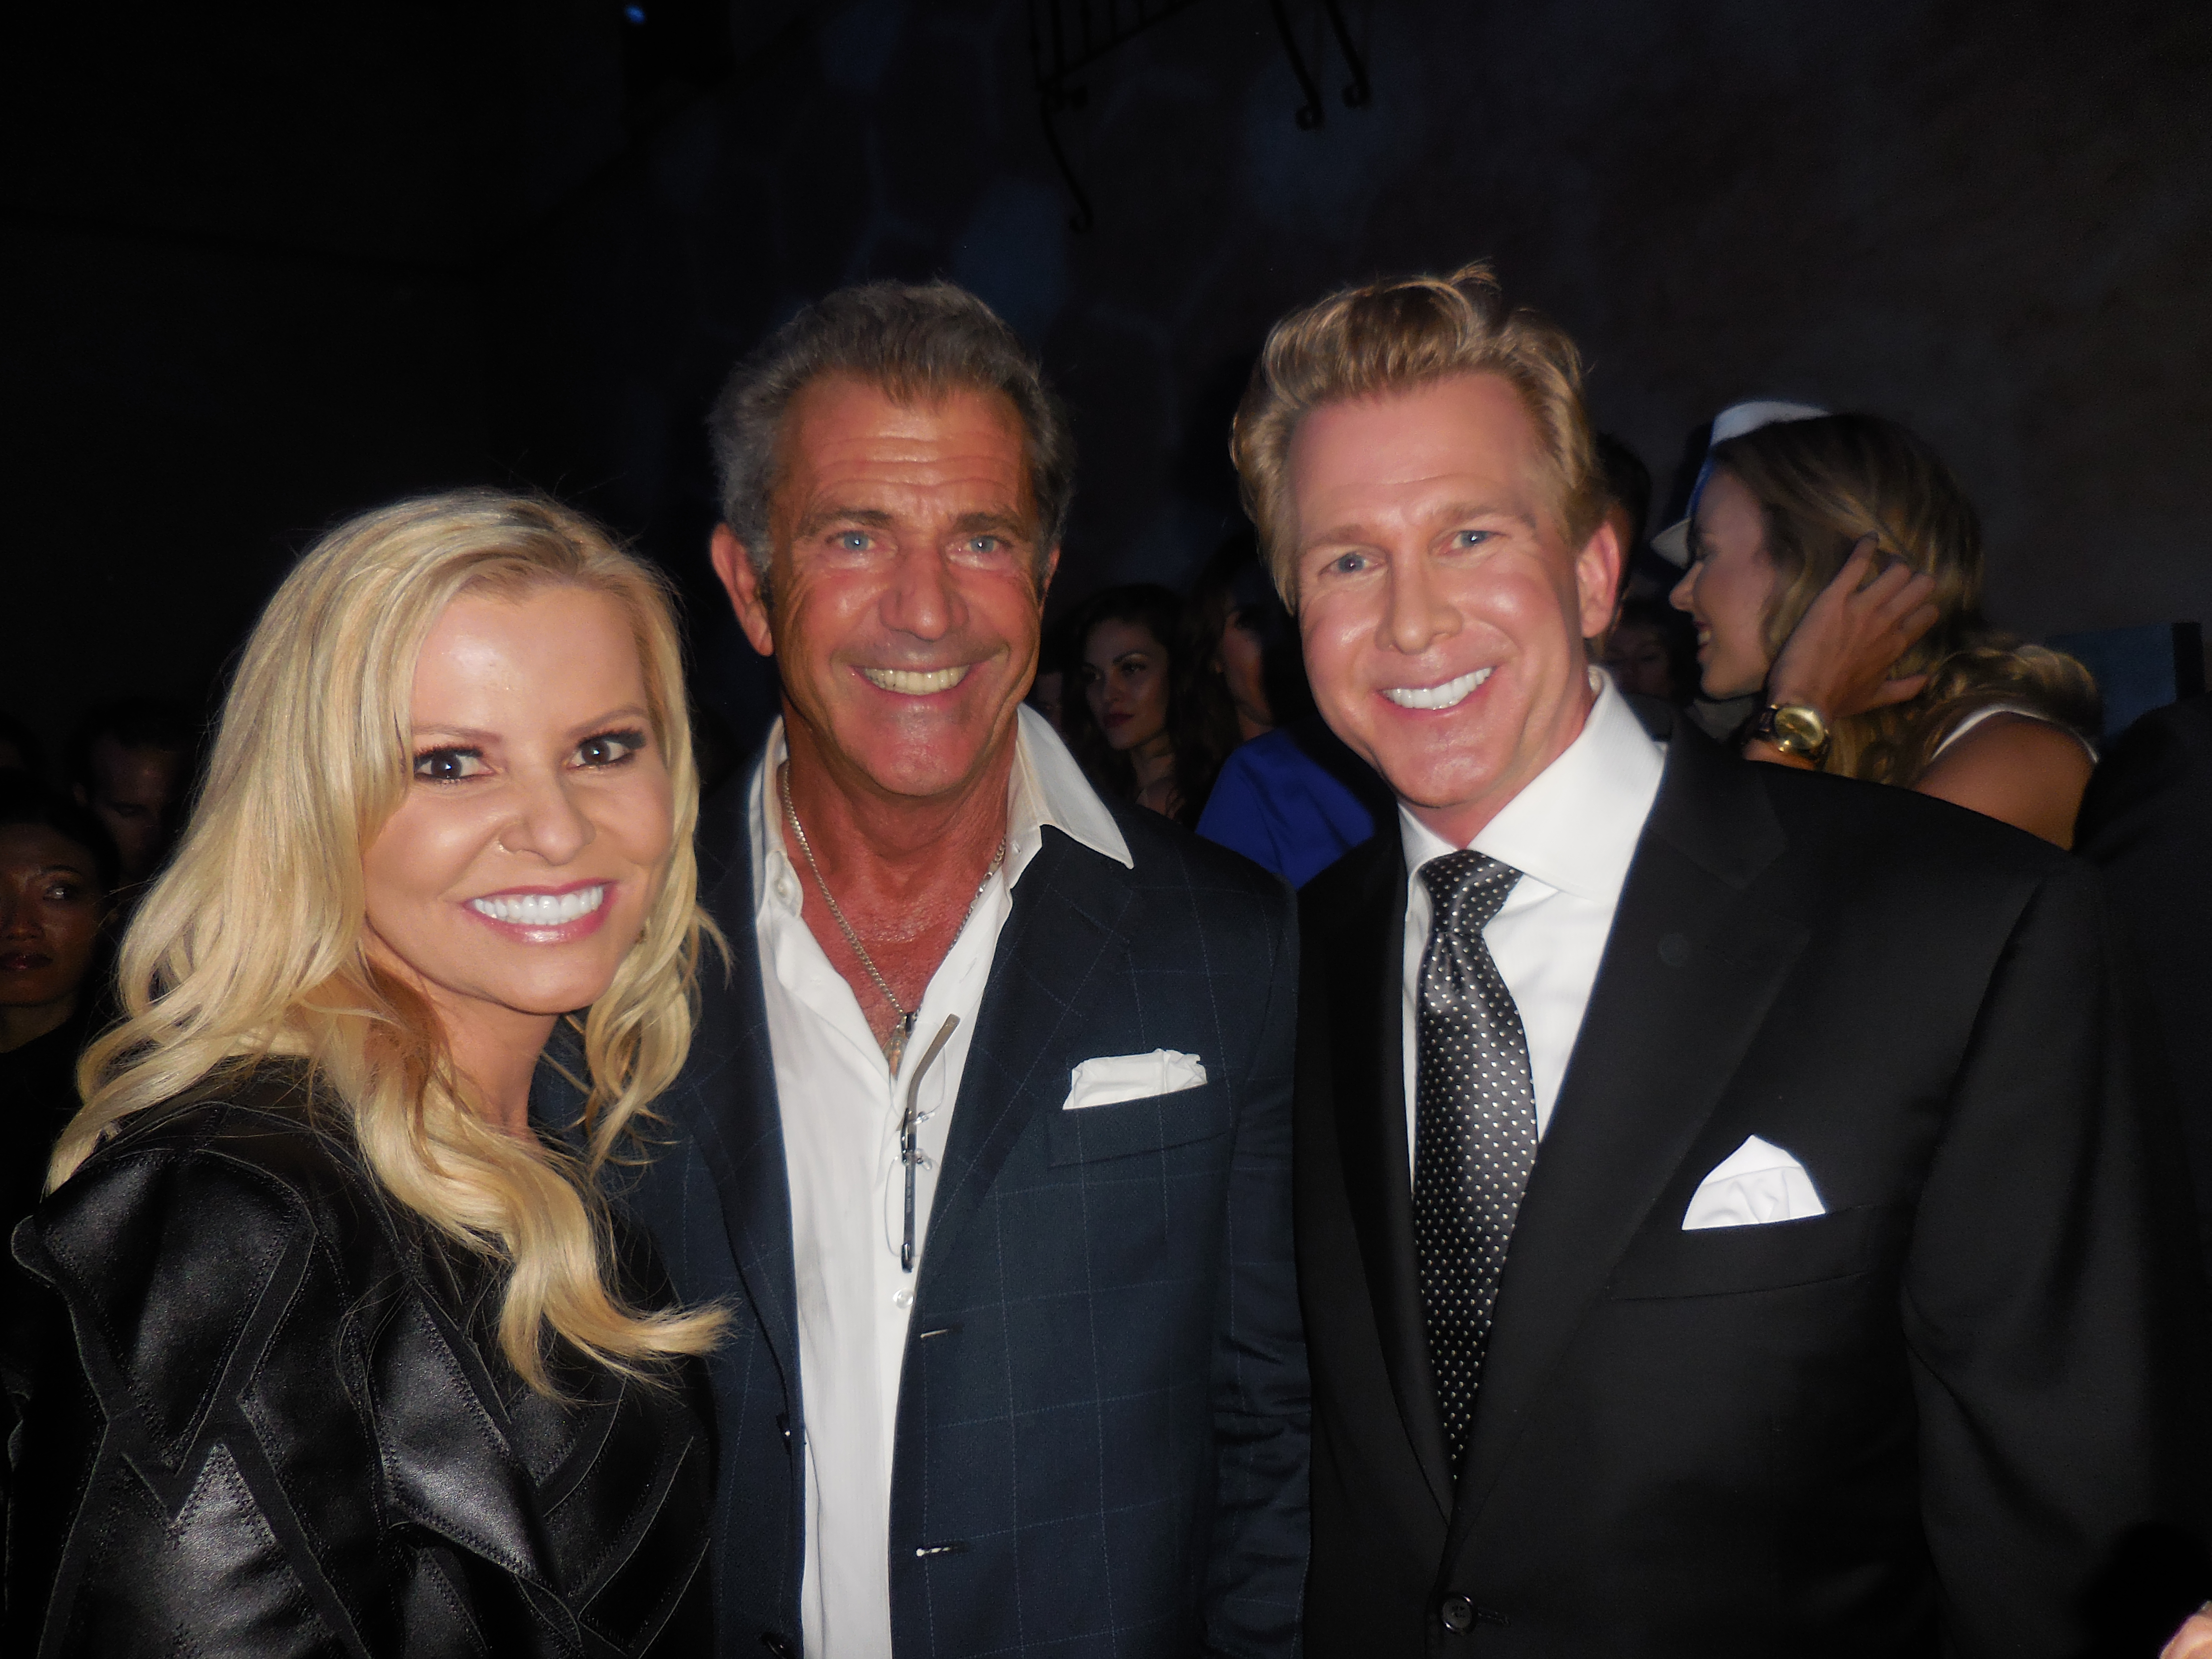 Katrin Benedikt, Mel Gibson and Creighton Rothenberger at The Expendables 3 premiere on August 15, 2014 in Hollywood, California.